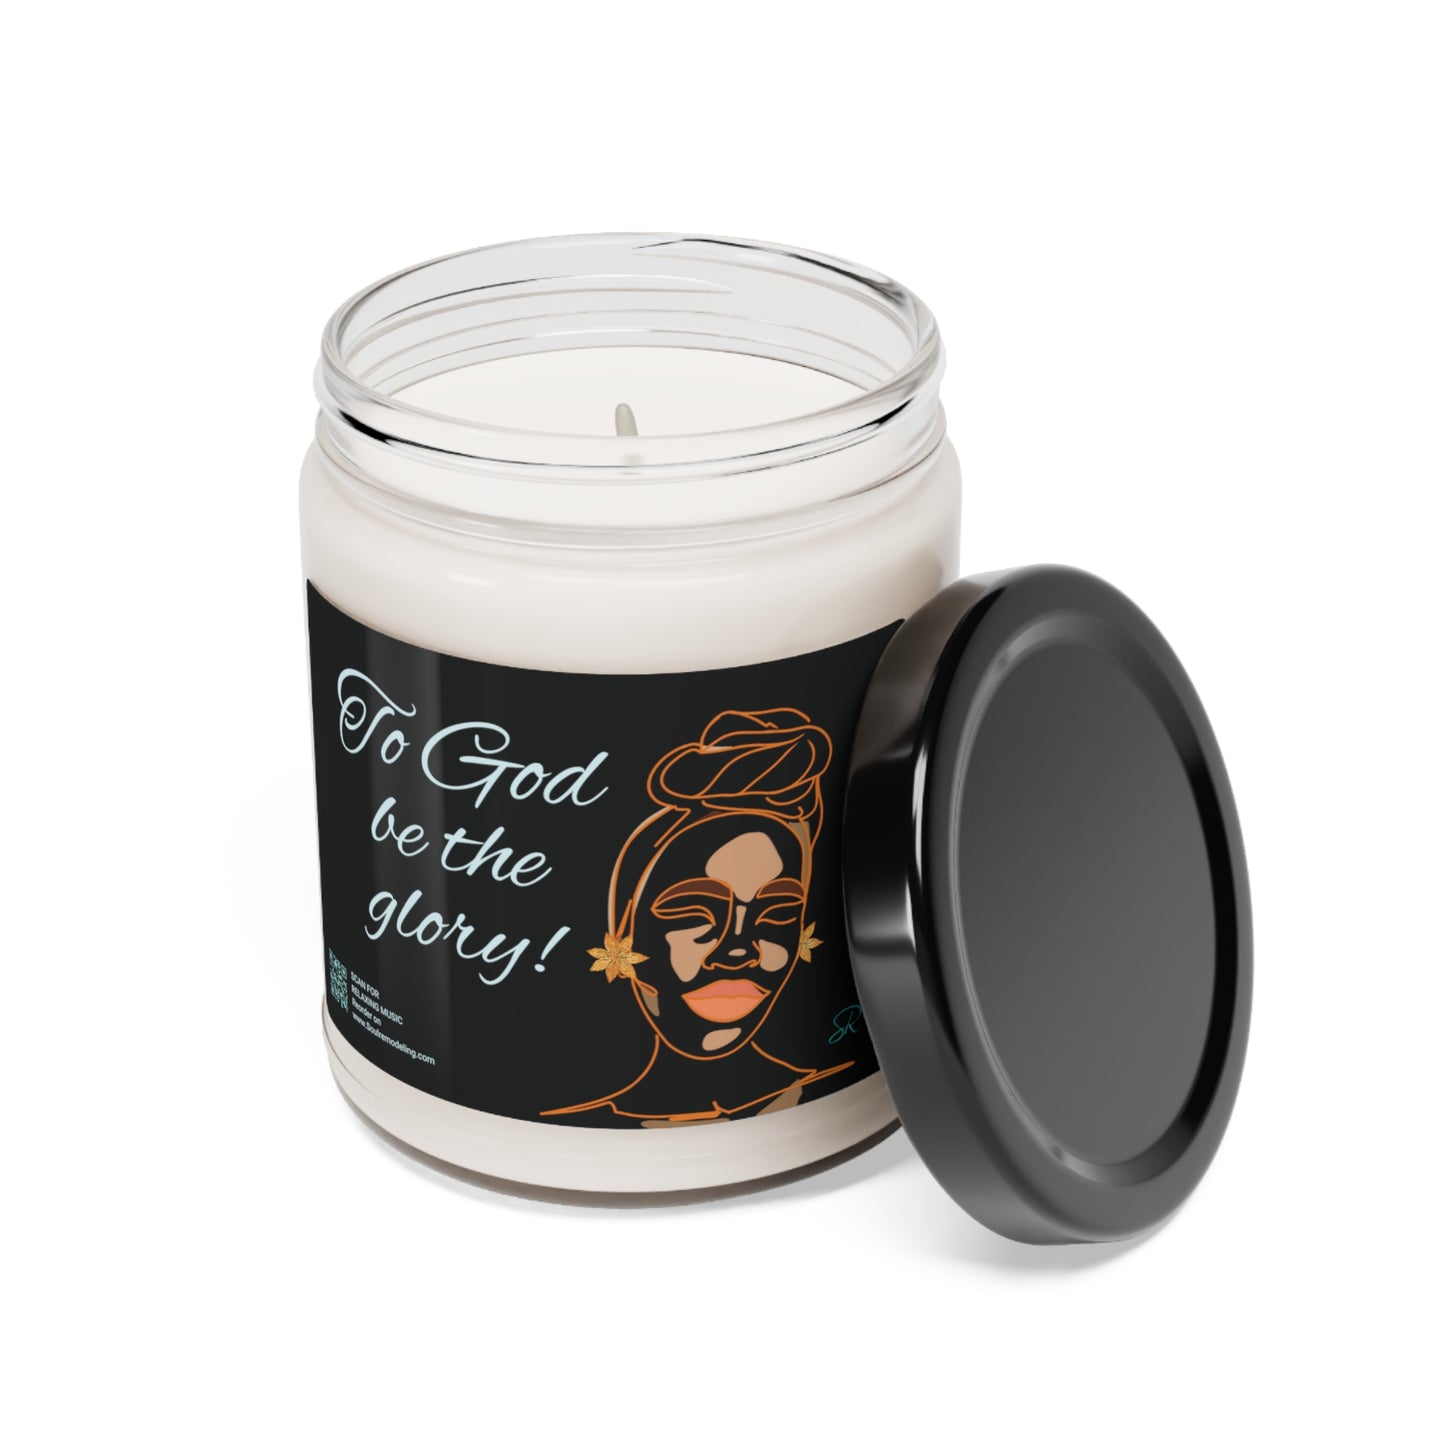 "To God be the glory!" Candle, 9oz